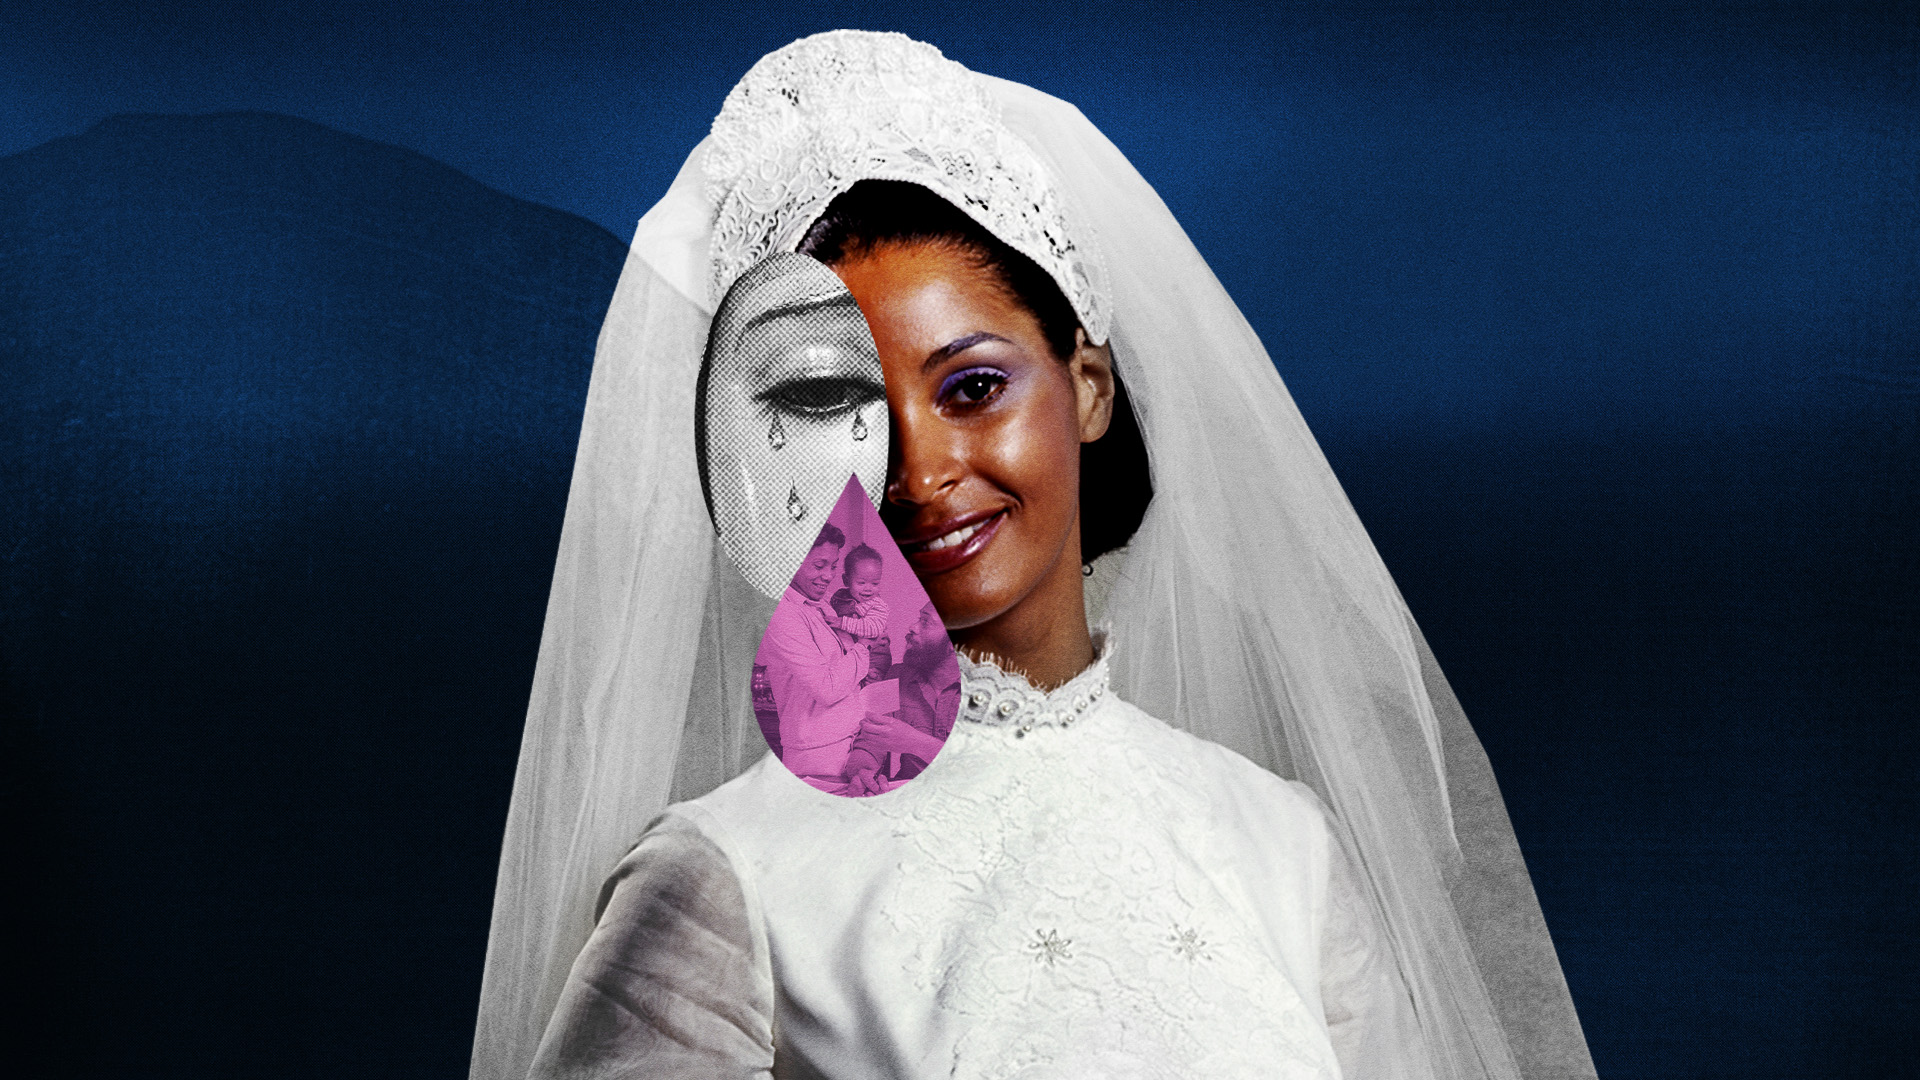 A photo of a woman wearing a 70s-era bridal gown and veil. A crying eye and a happy Black family within a lavender teardrop shape are collaged on top of the woman’s image.